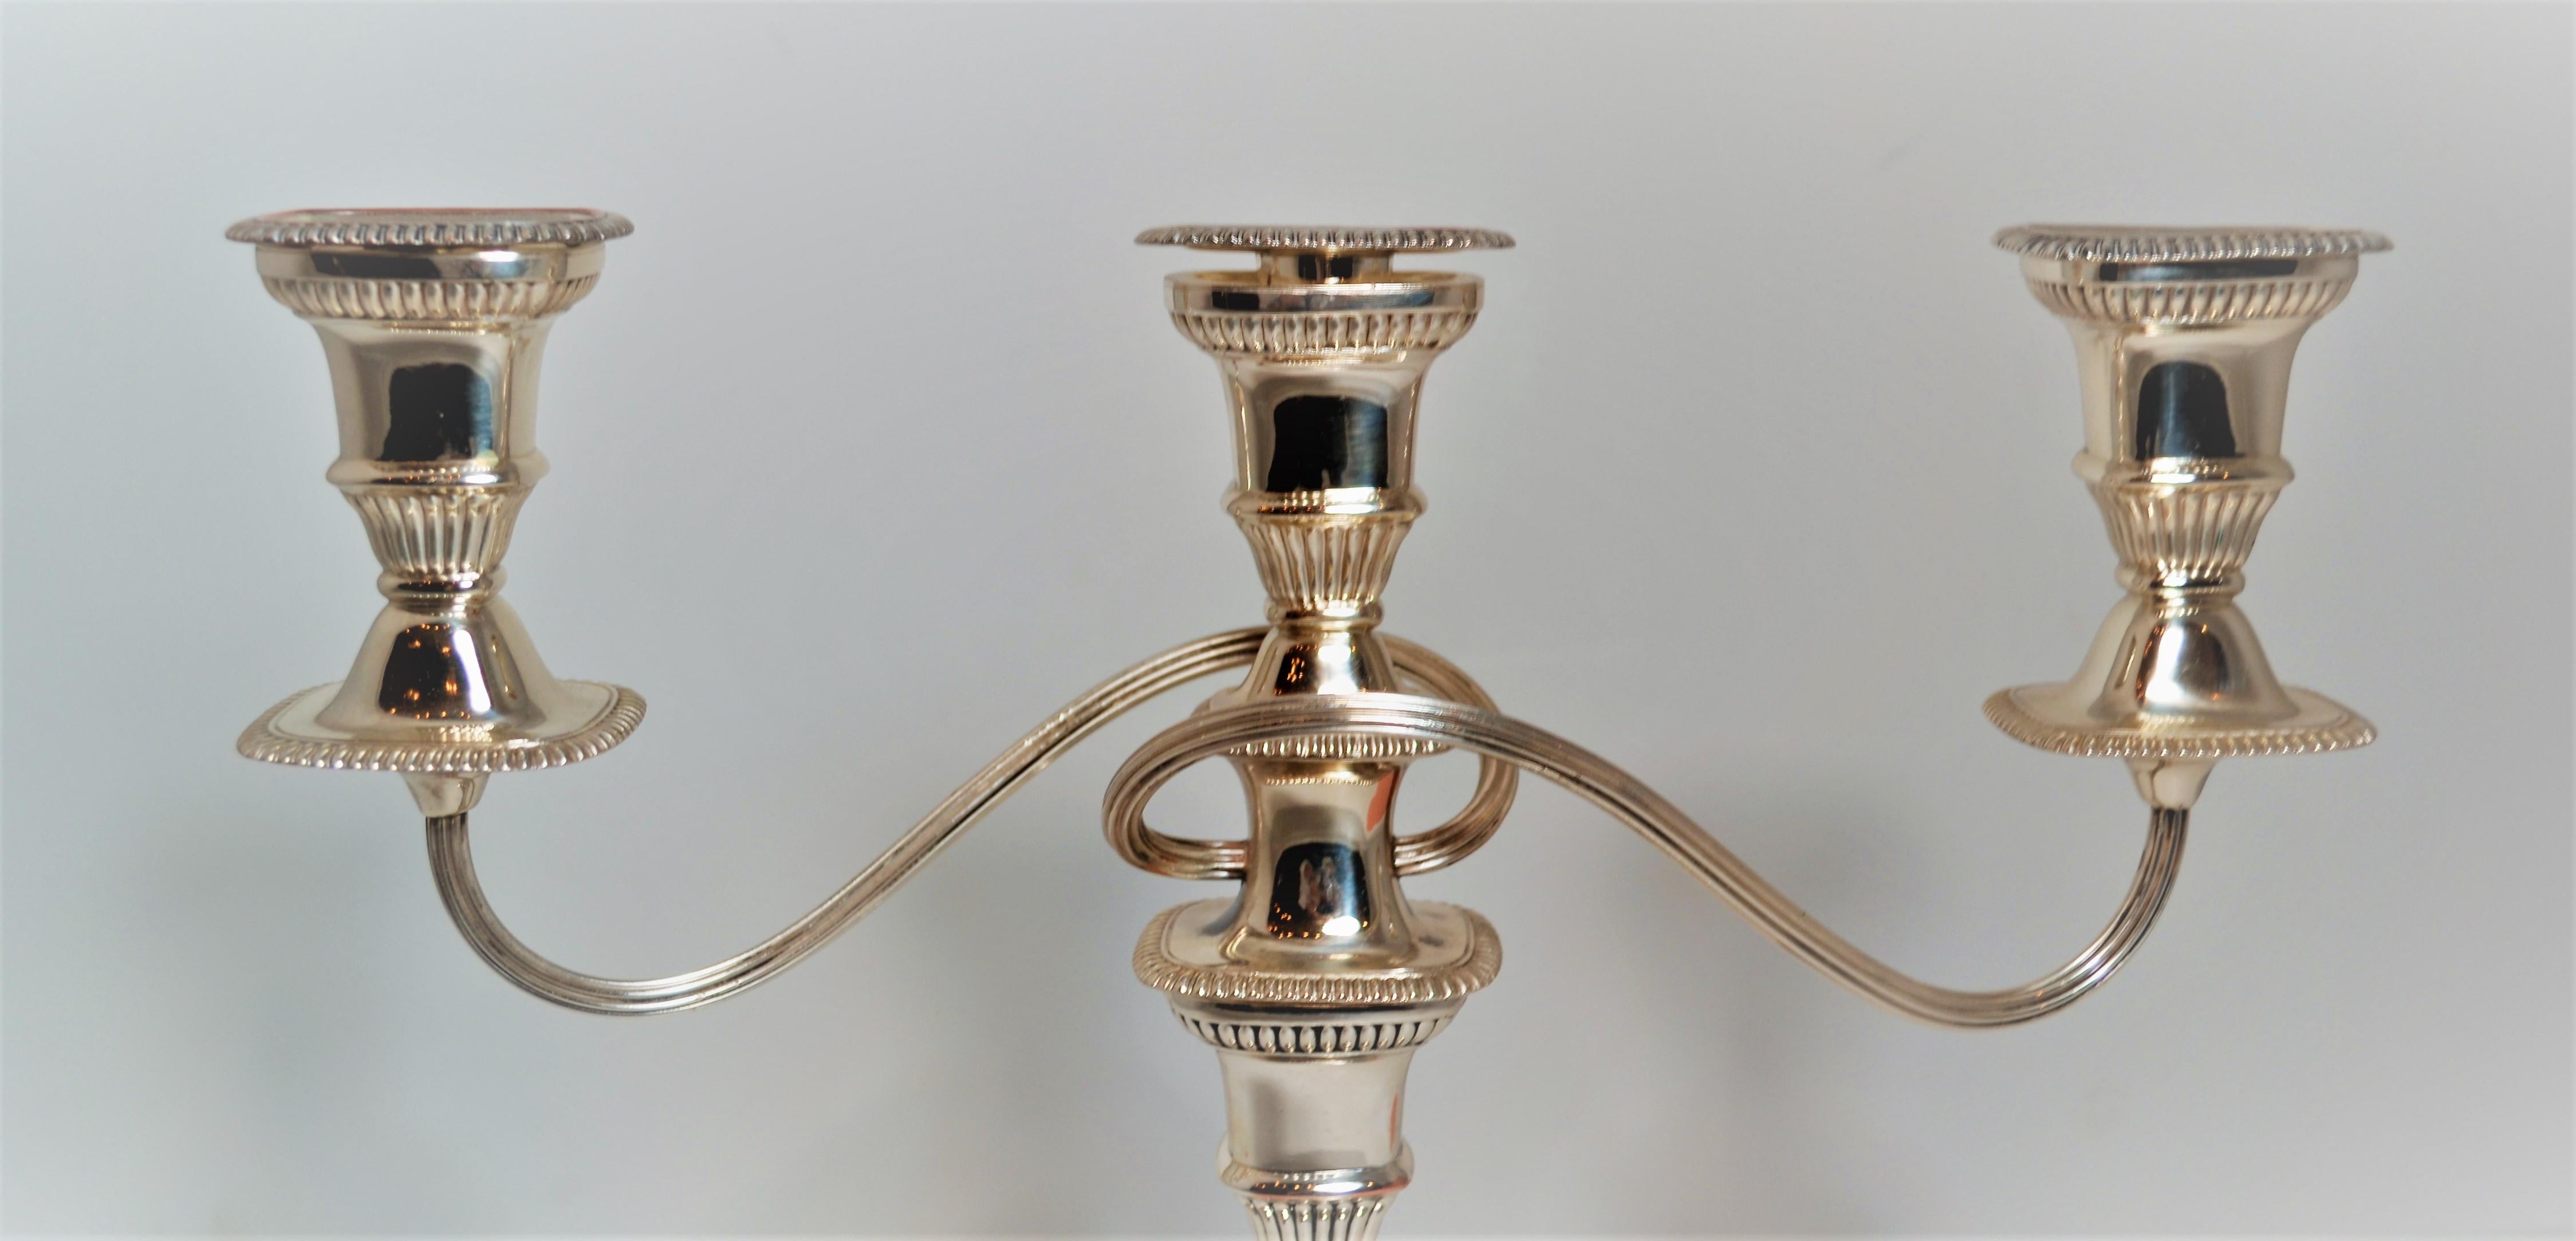 Pair of Antique English Sheffield Candlesticks In Good Condition For Sale In New Orleans, LA